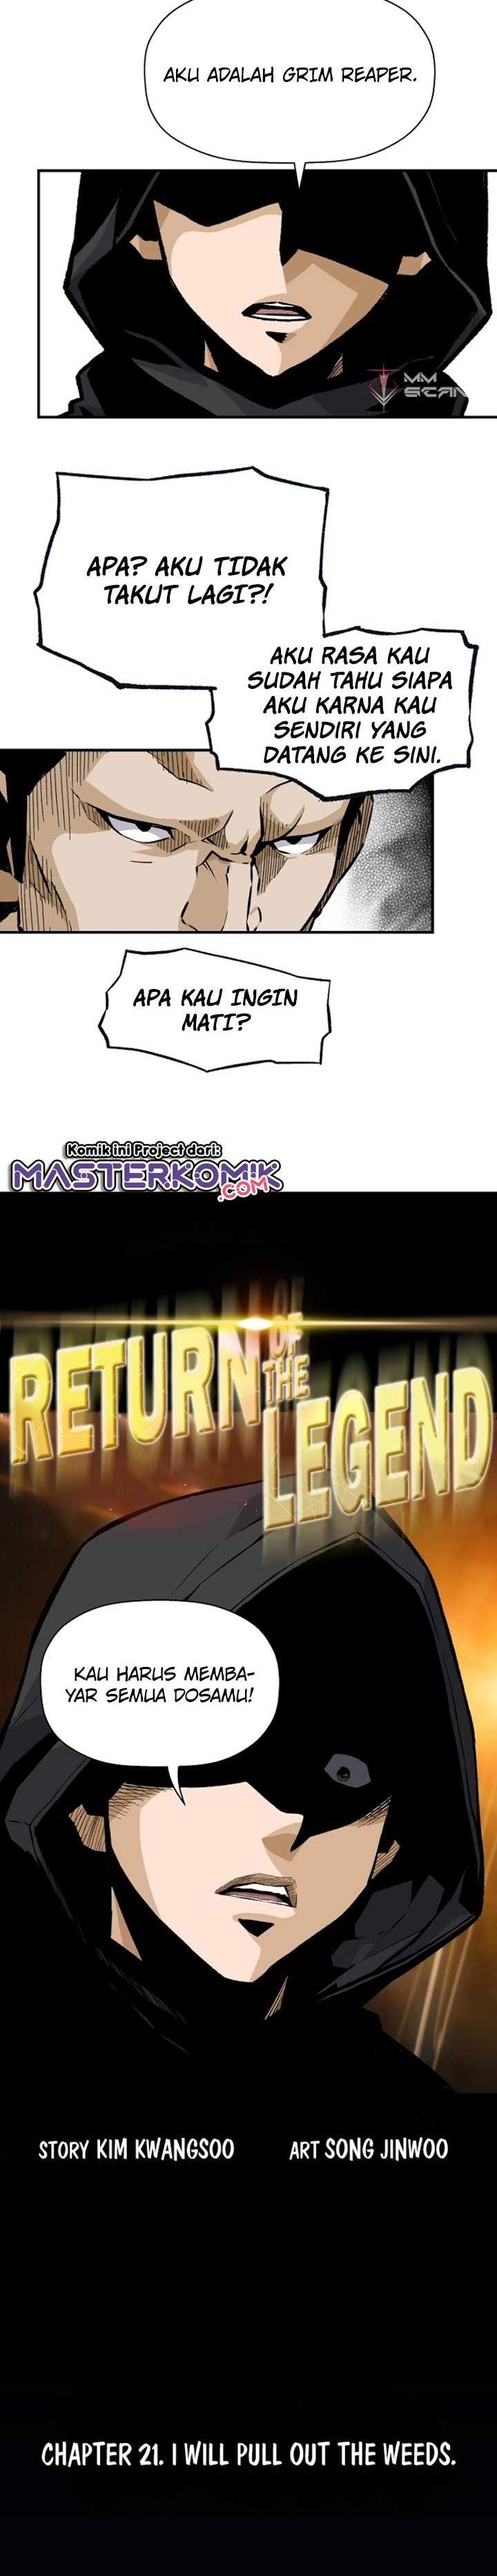 Return of the Legend Chapter 21